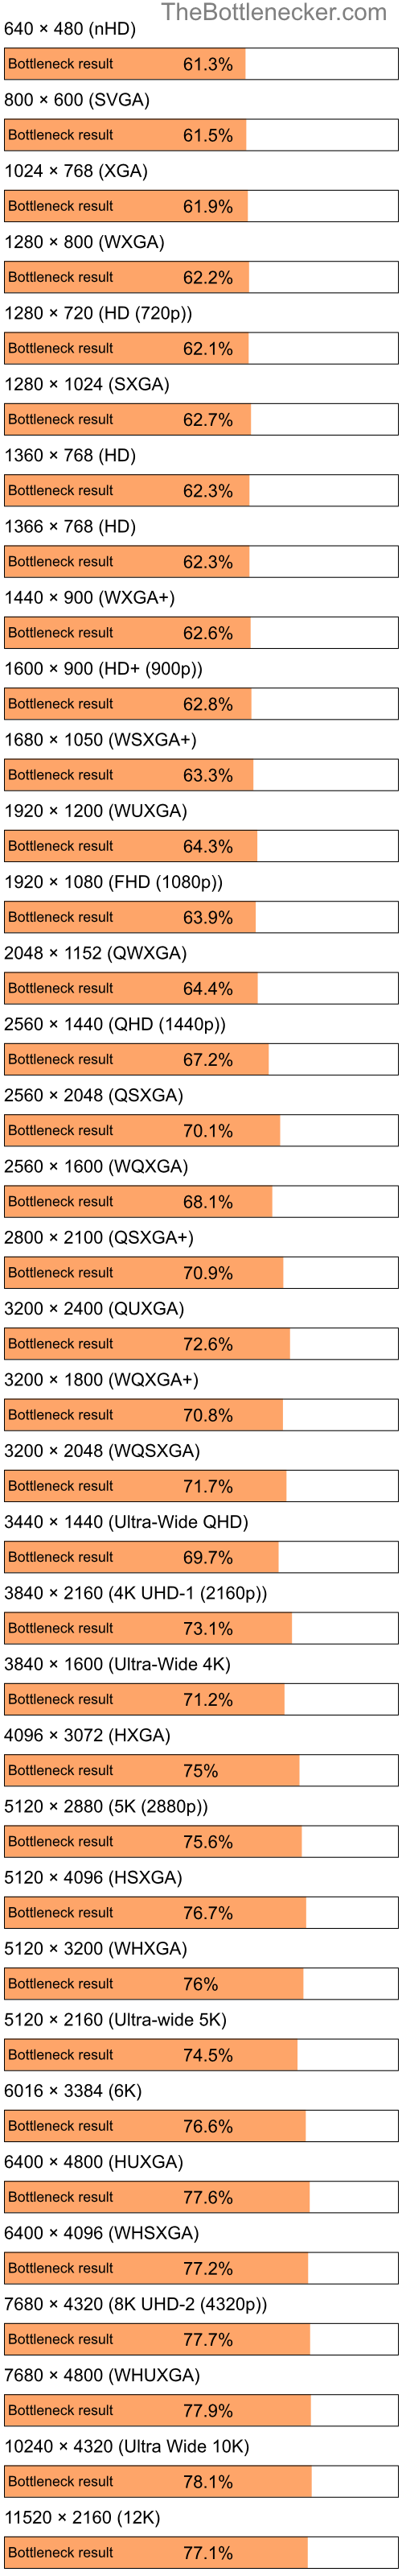 Bottleneck results by resolution for Intel Atom N270 and AMD Mobility Radeon HD 4225 in Processor Intense Tasks